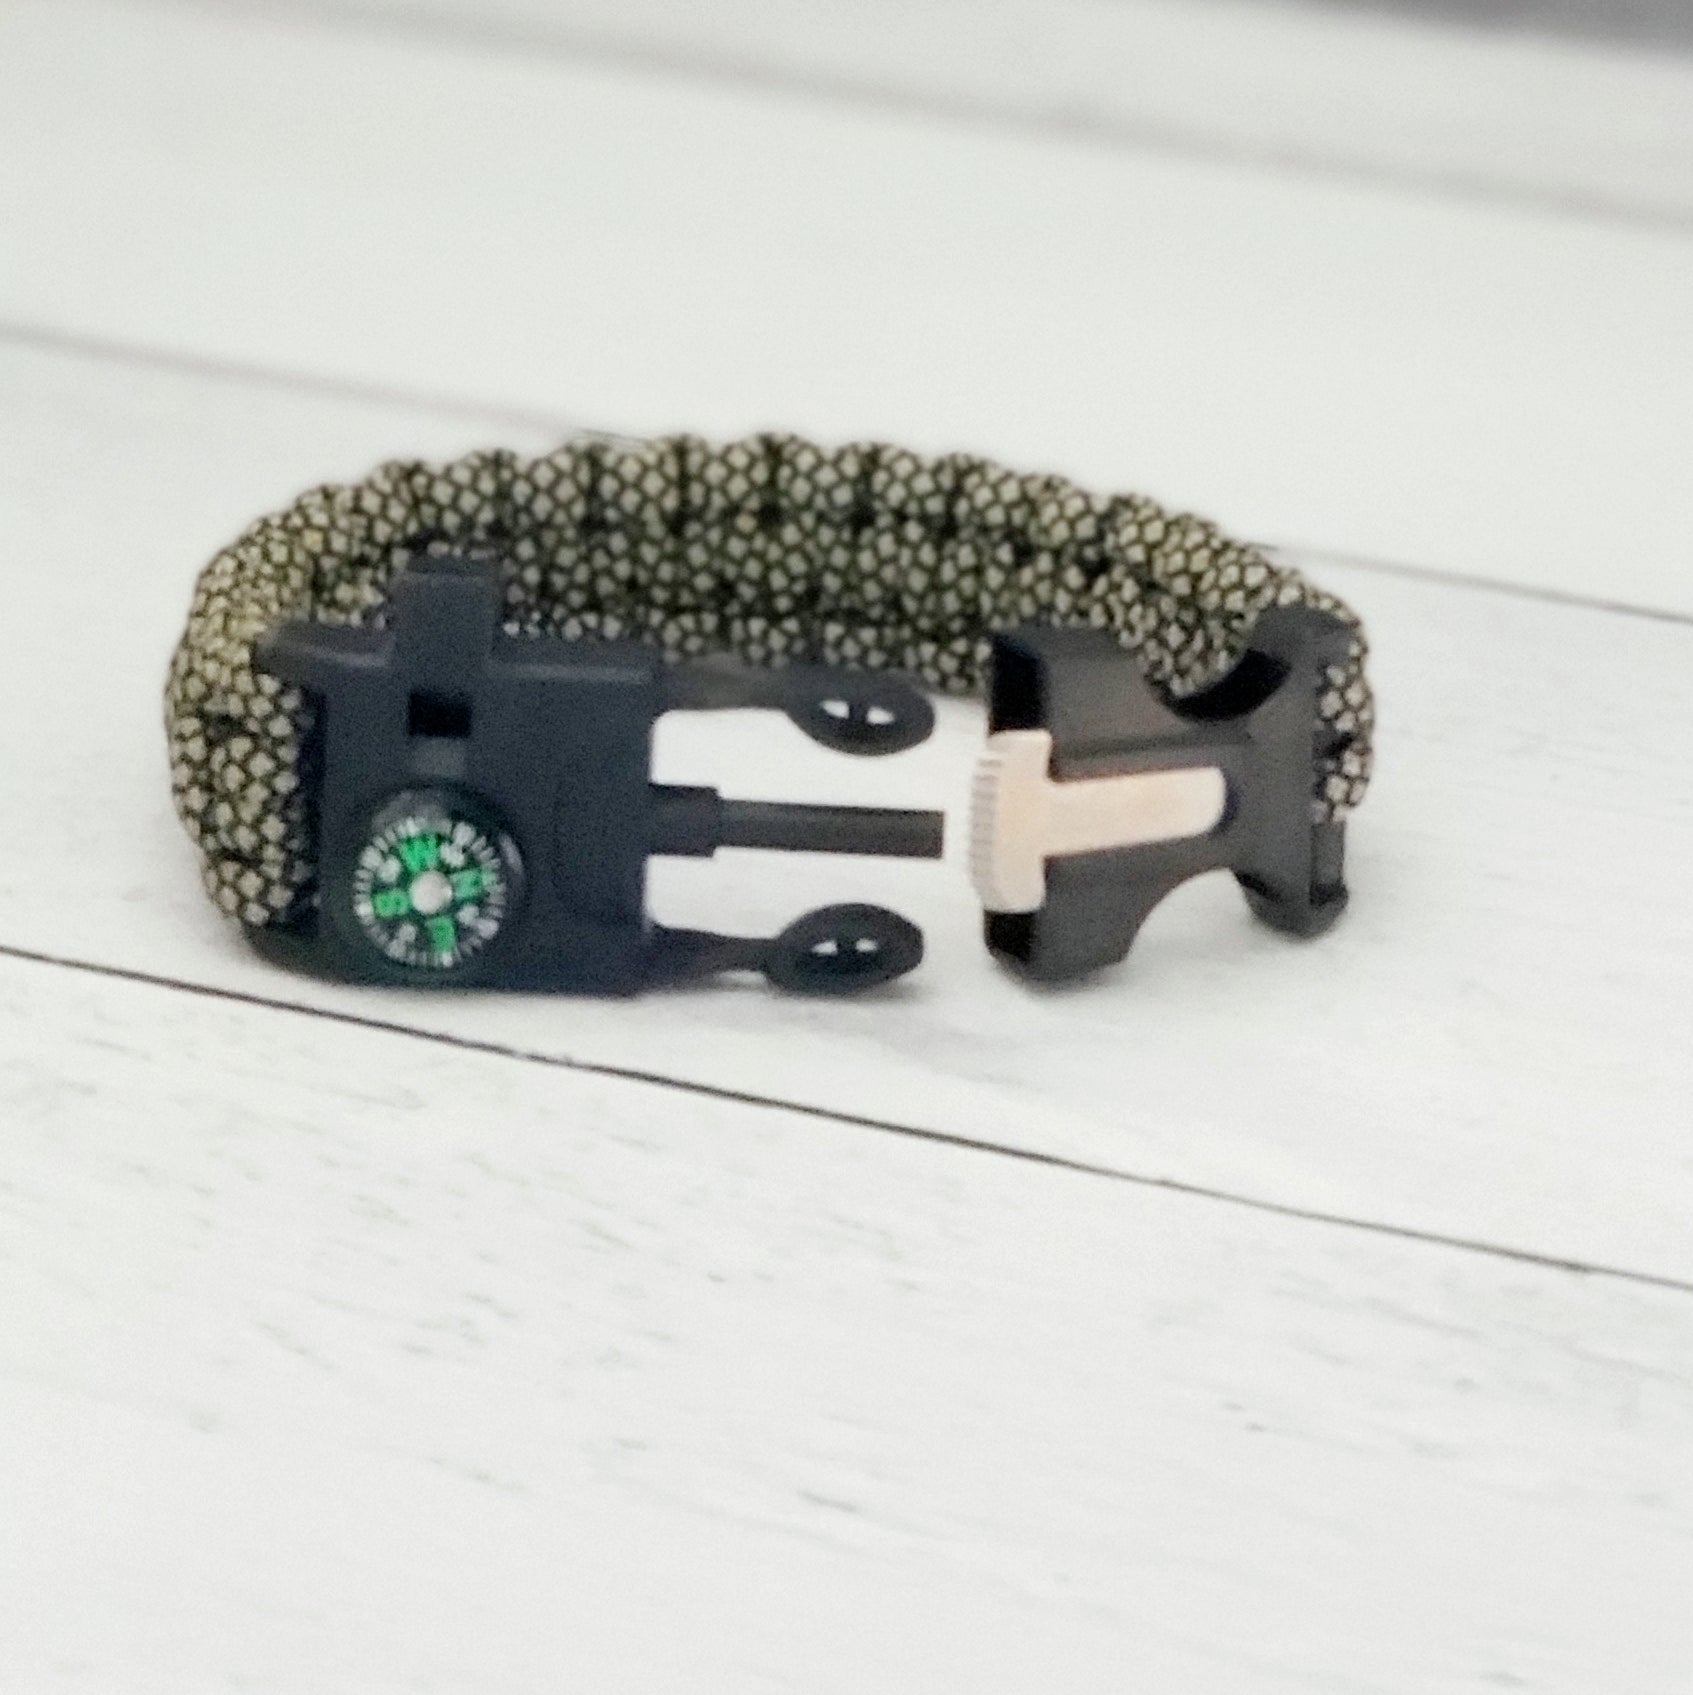 Paracord Utility Bracelet for Him - Green Speckled Camo (1 Only)